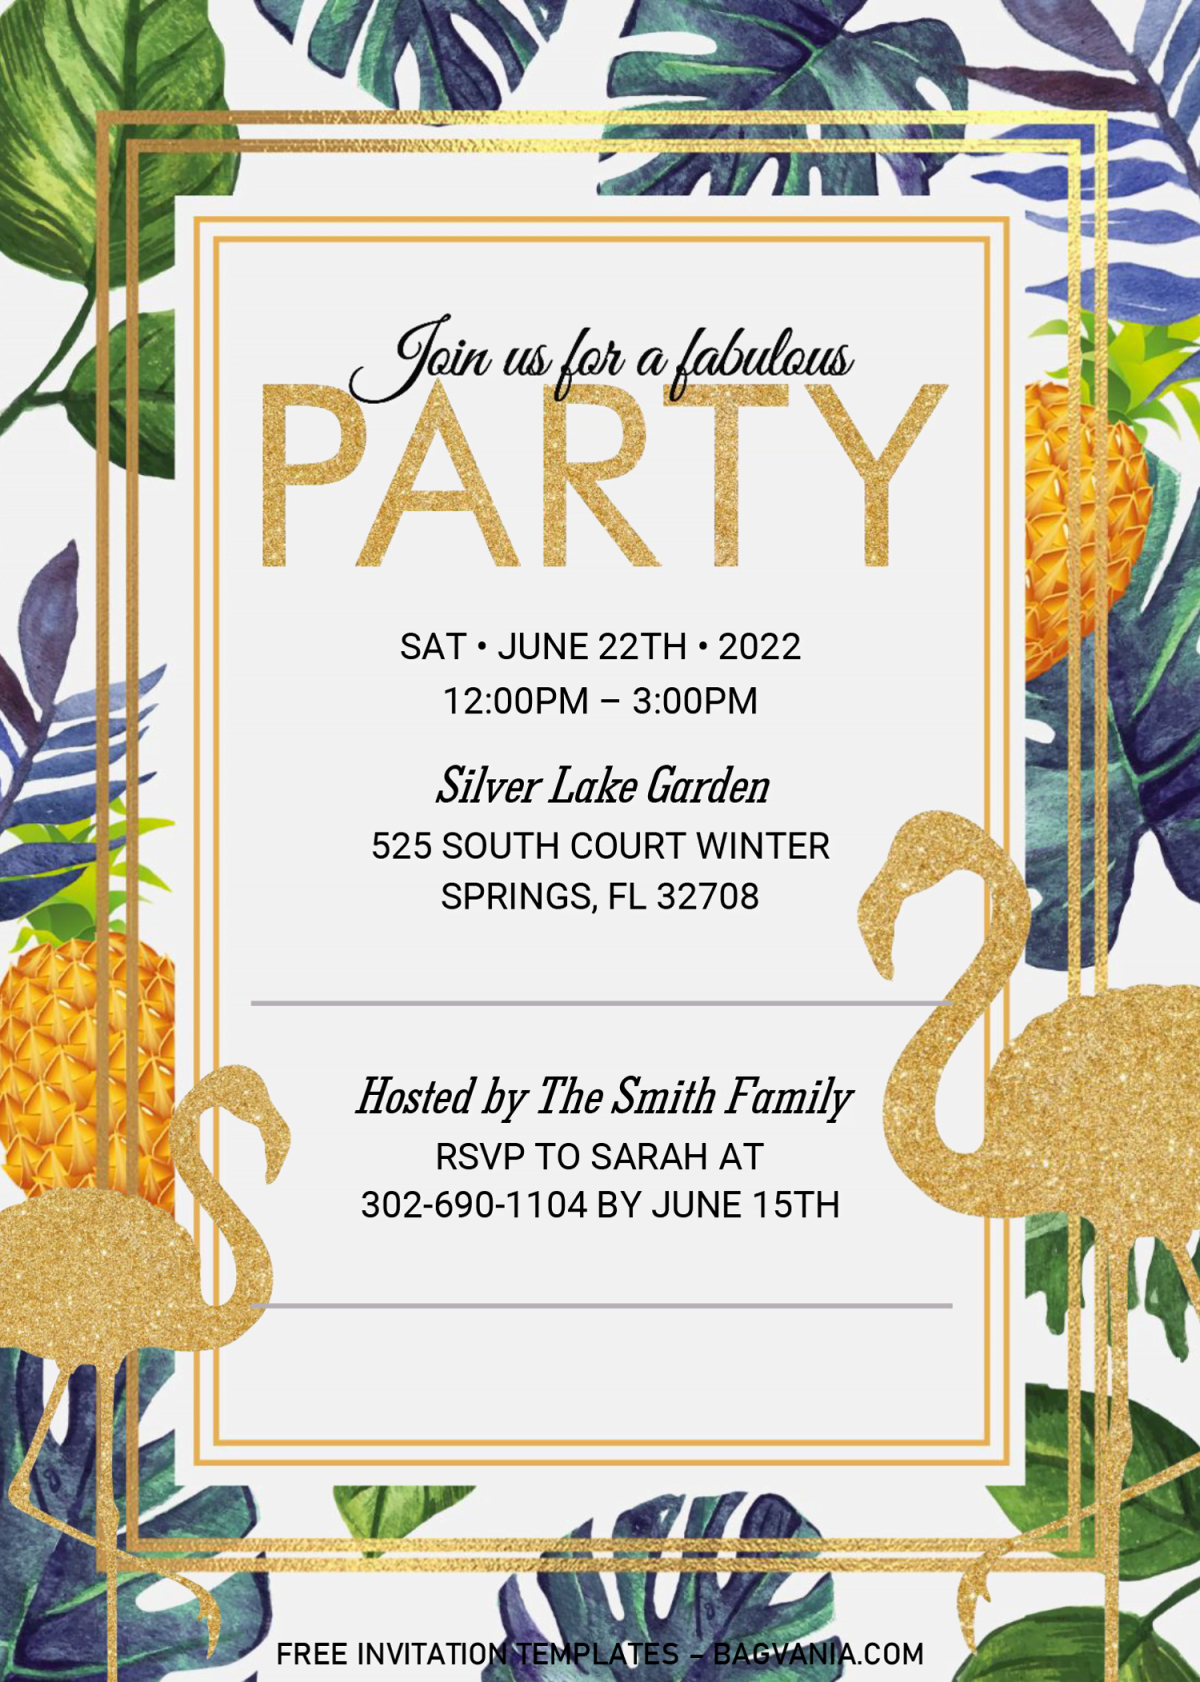 Summer Party Invitation Templates - Editable .Docx and has Gold Glitter Flamingo